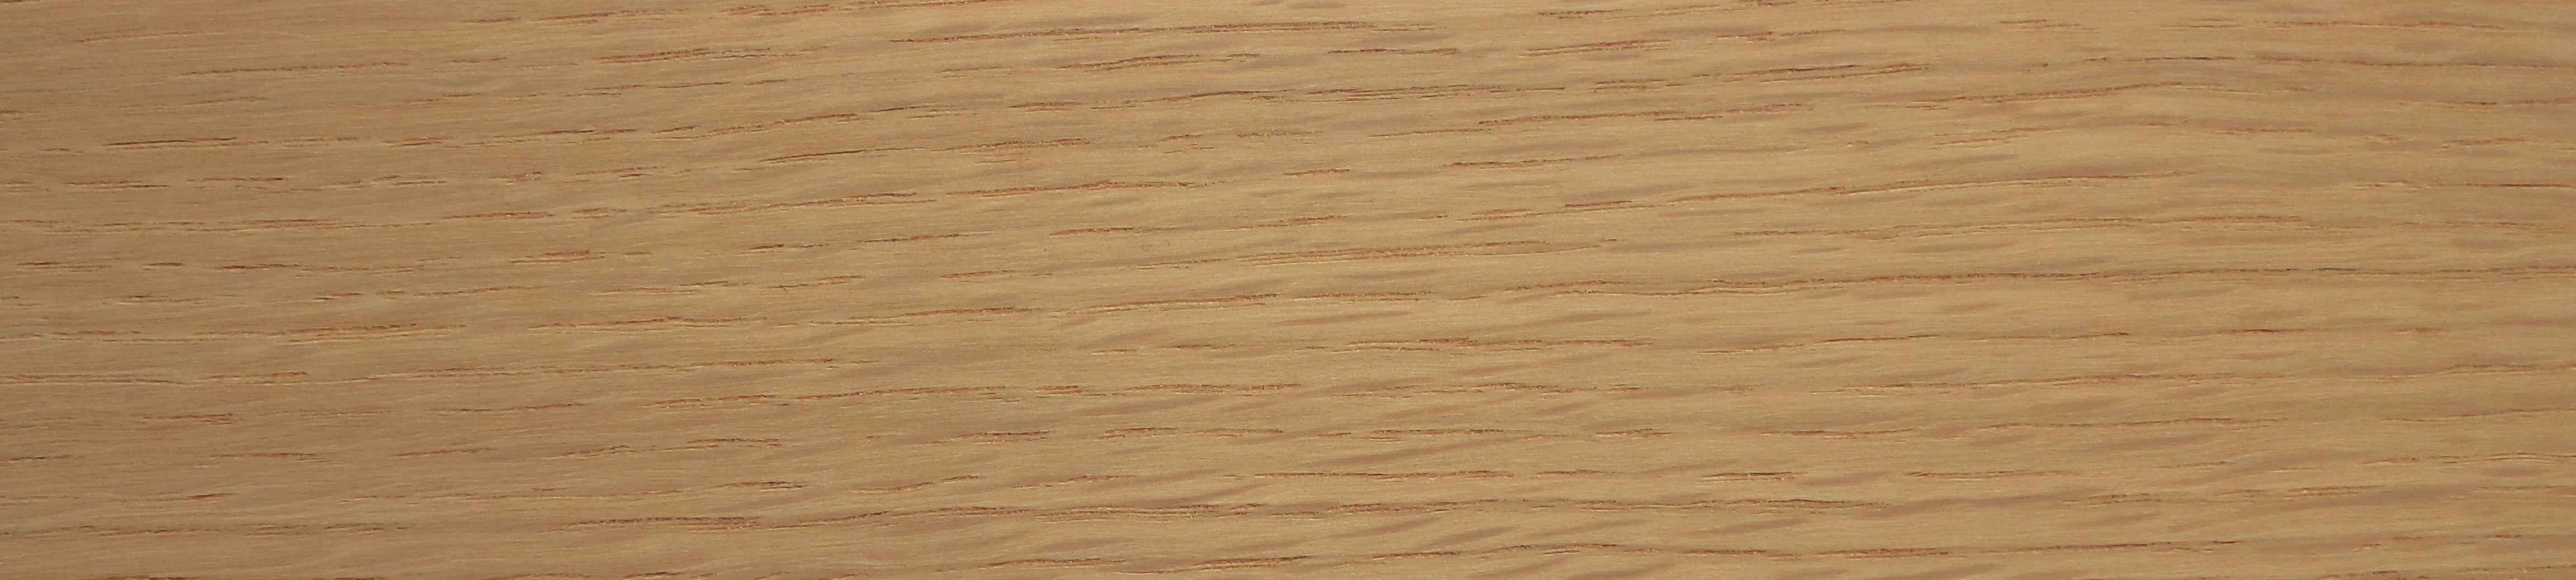 American White Oak Thick wood Pre-glued Edging / Lipping 30mm x 1mm x 50 Metres - EDGEBANDER OR IRON ON